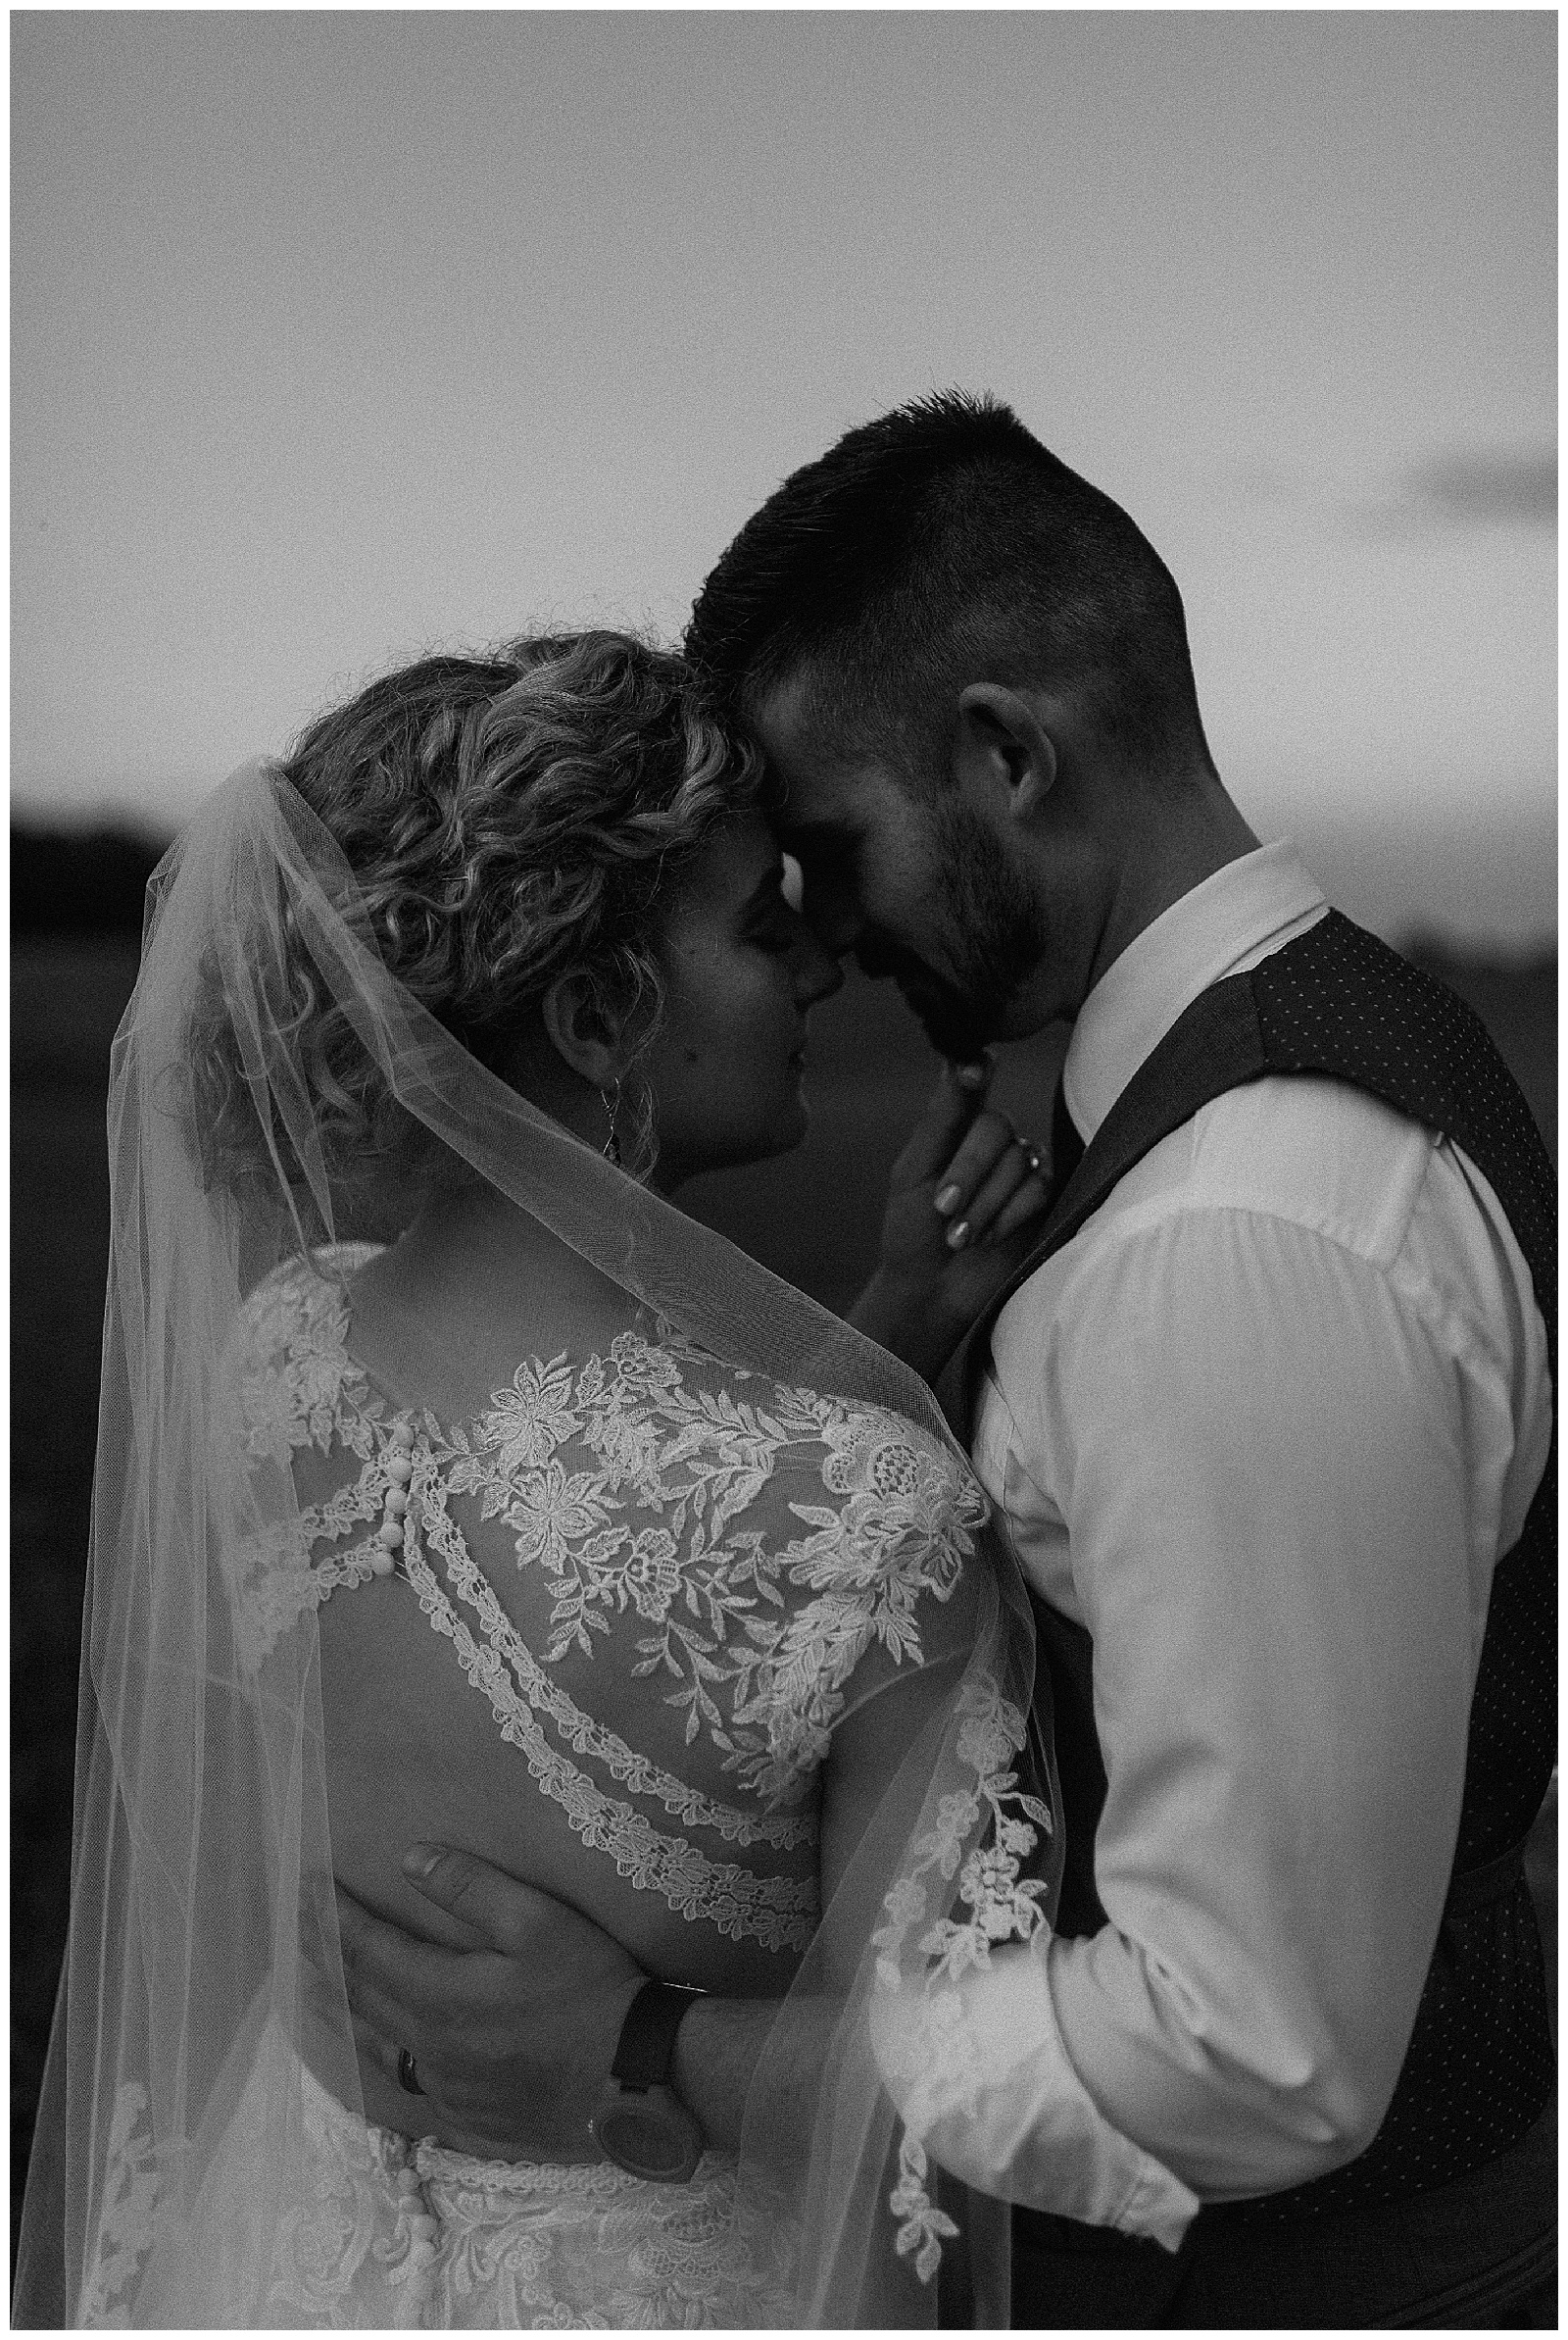 romantic and intimate wedding pictures, pride and prejudice wedding, emotional wedding, emotional bride and groom, sunset wedding photos, moody wedding photography, dreamy bride and groom photos